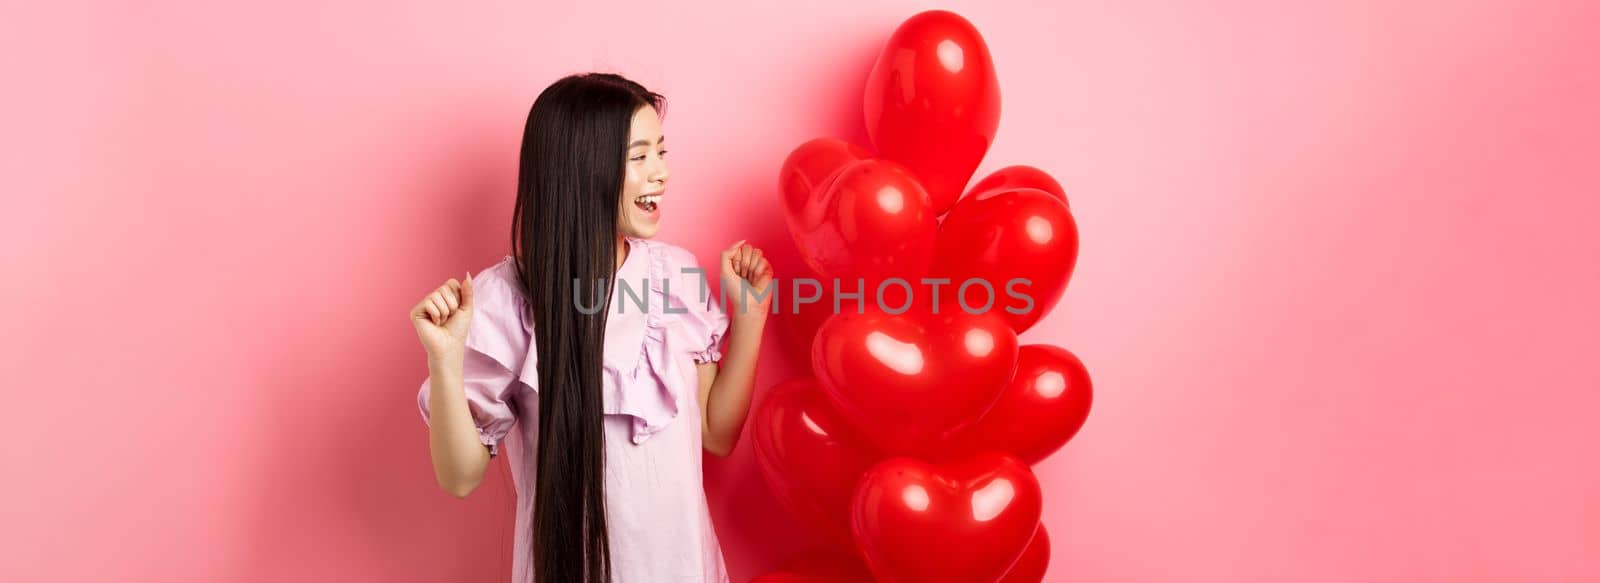 Asian teenage girl with long hair, cheering from valentines day romantic gift, looking at logo and smiling happy, jumping from joy near lovers gift heart balloons, pink background.